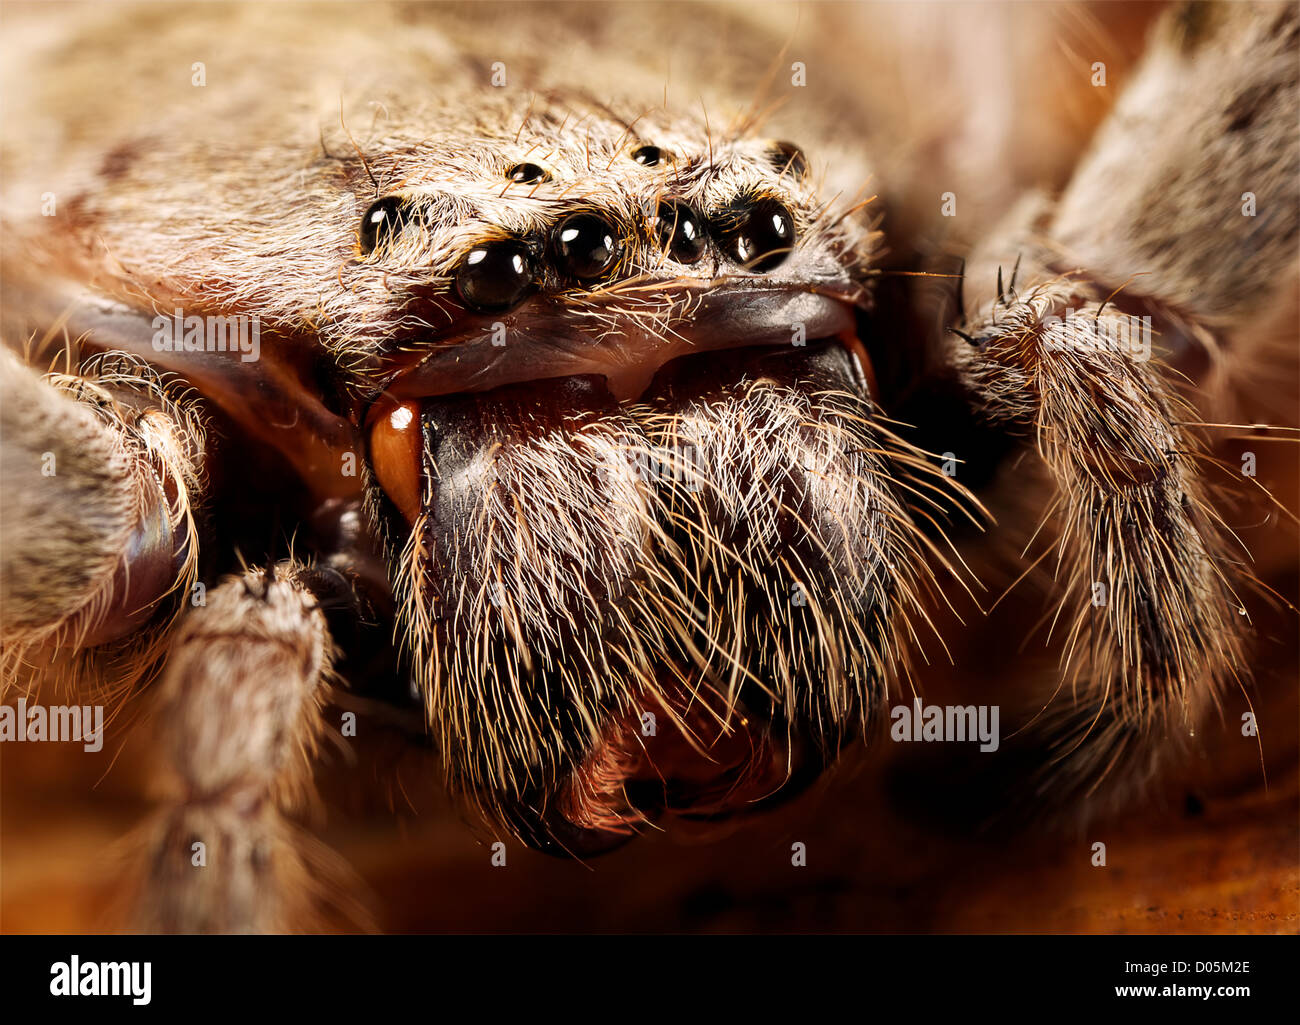 an extreme closeup of a huntsman spider Stock Photo